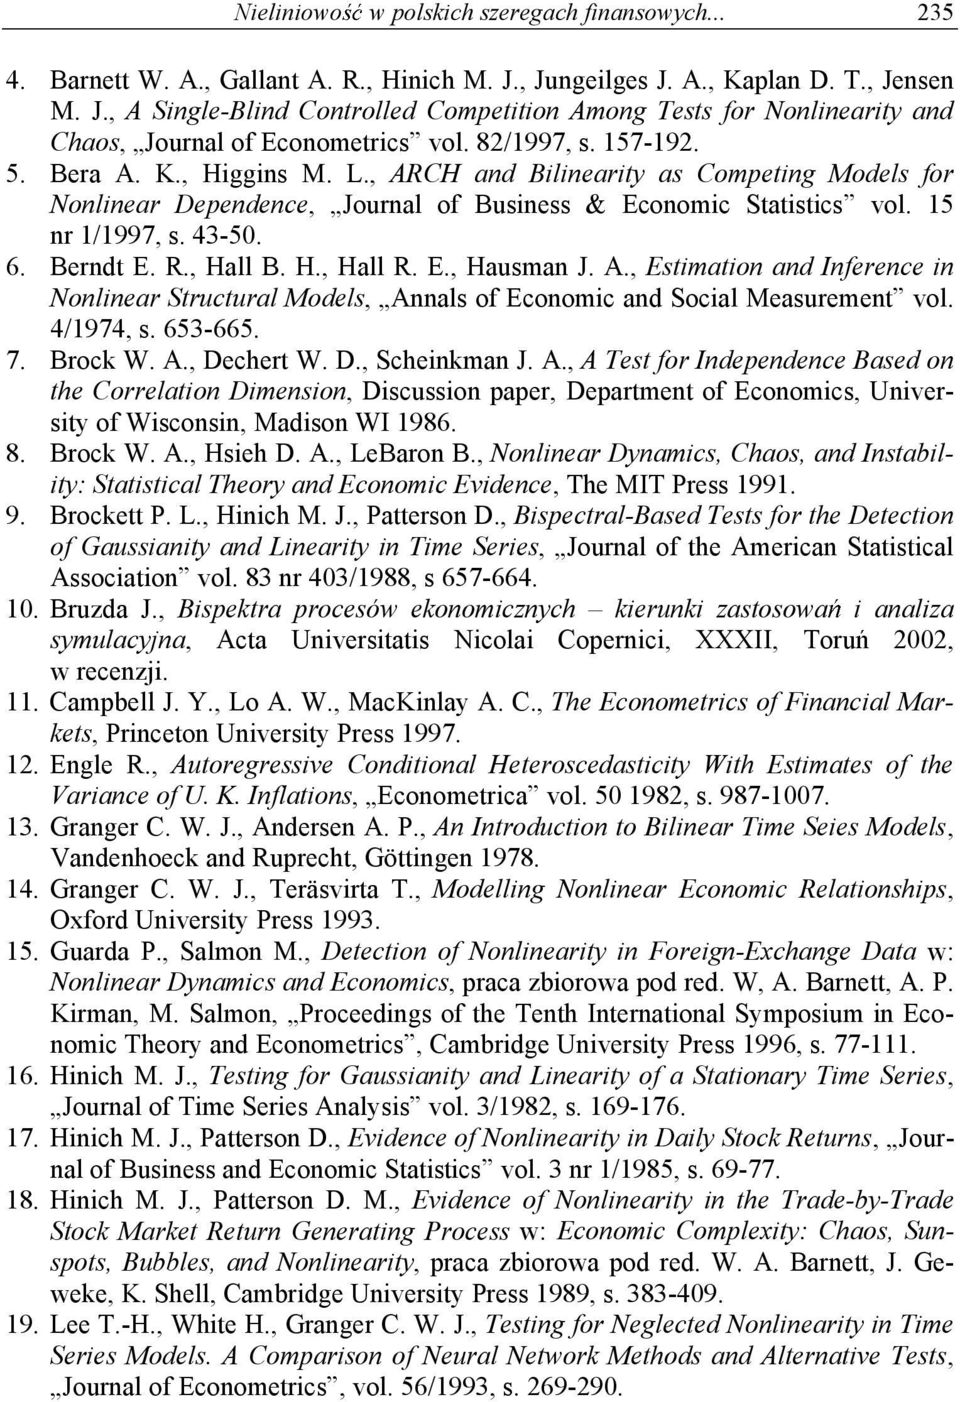 , ARCH and Bilinearity as Competing Models for Nonlinear Dependence, Journal of Business & Economic Statistics vol. 15 nr 1/1997, s. 4350. 6. Berndt E. R., Hall B. H., Hall R. E., Hausman J. A., Estimation and Inference in Nonlinear Structural Models, Annals of Economic and Social Measurement vol.